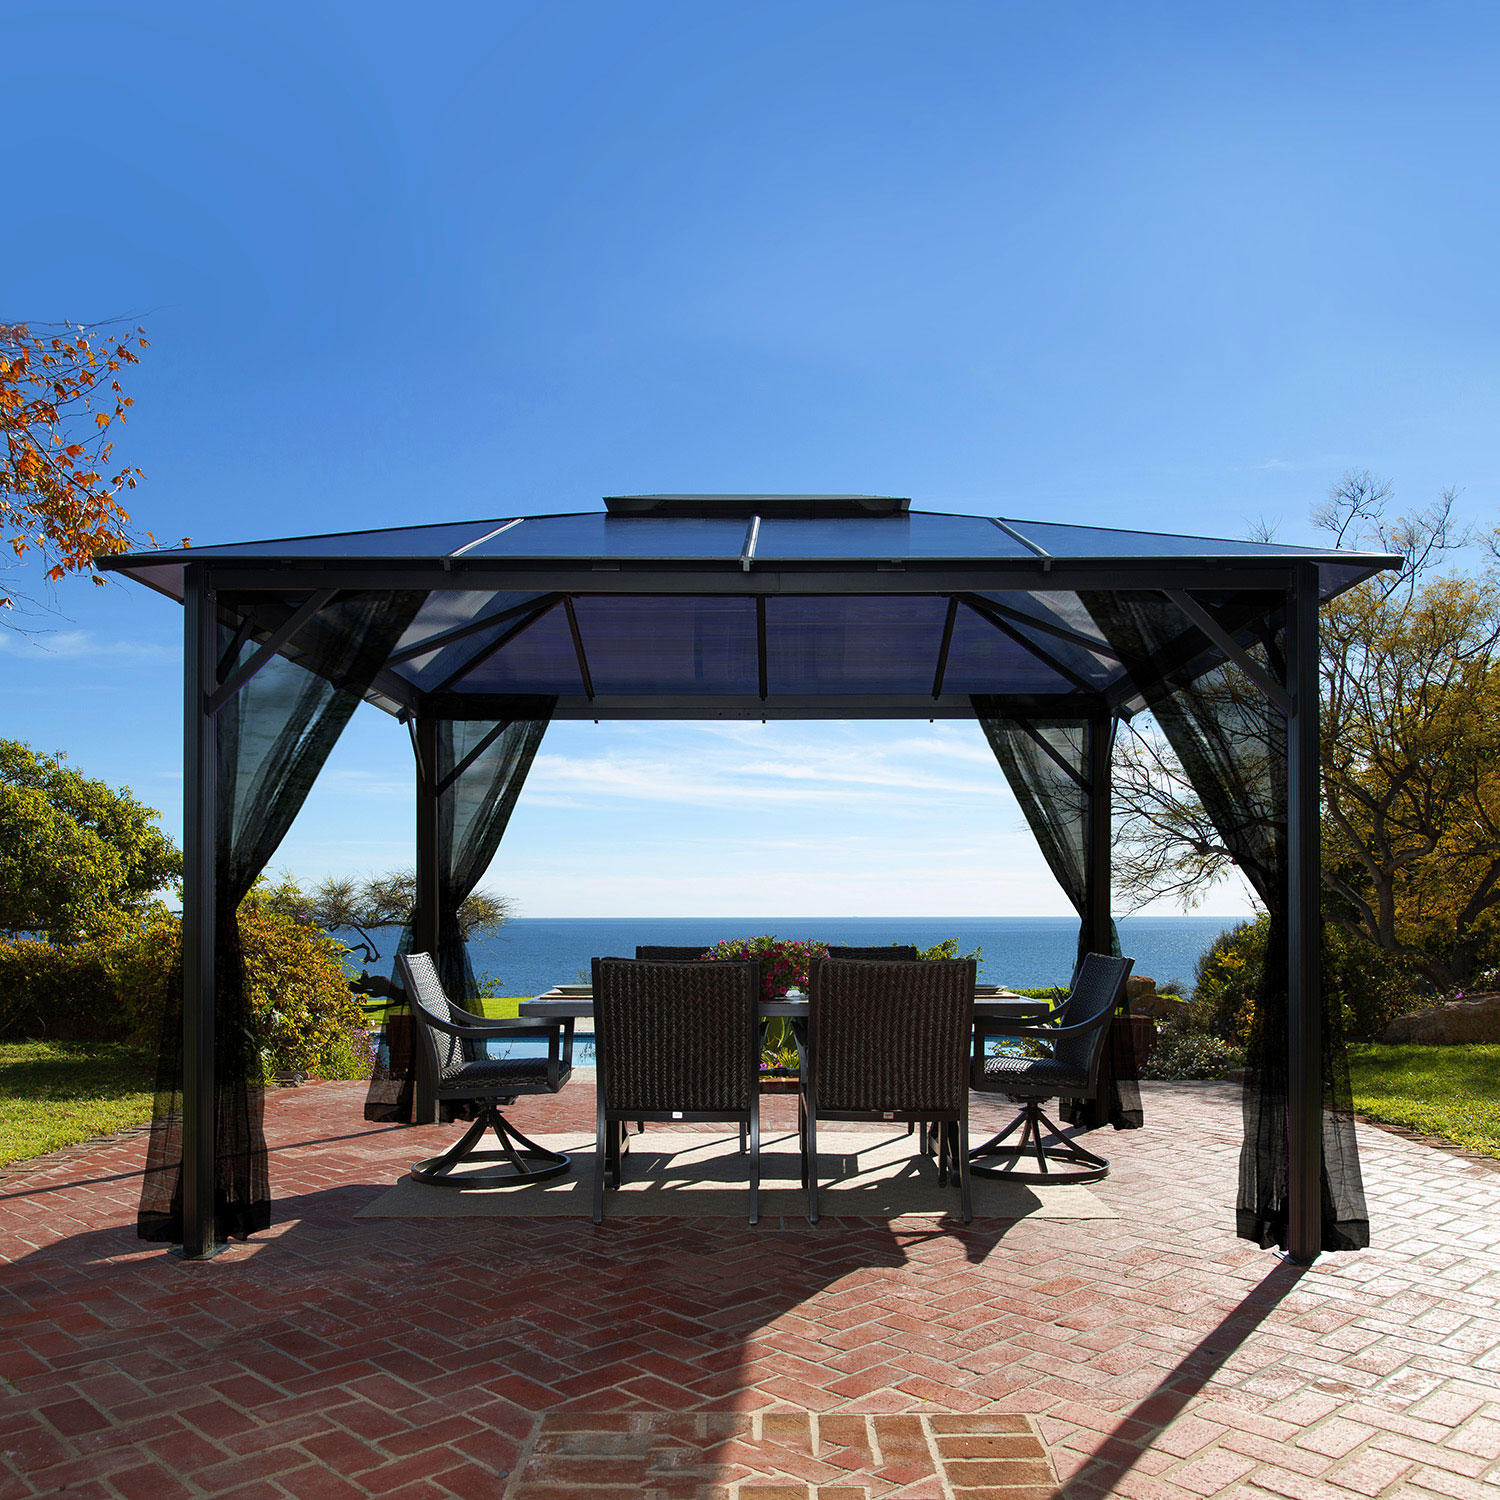 Paragon Outdoor 11′ x 13′ Aluminum Hard Top Gazebo with Louvered Roof and Mosquito Netting